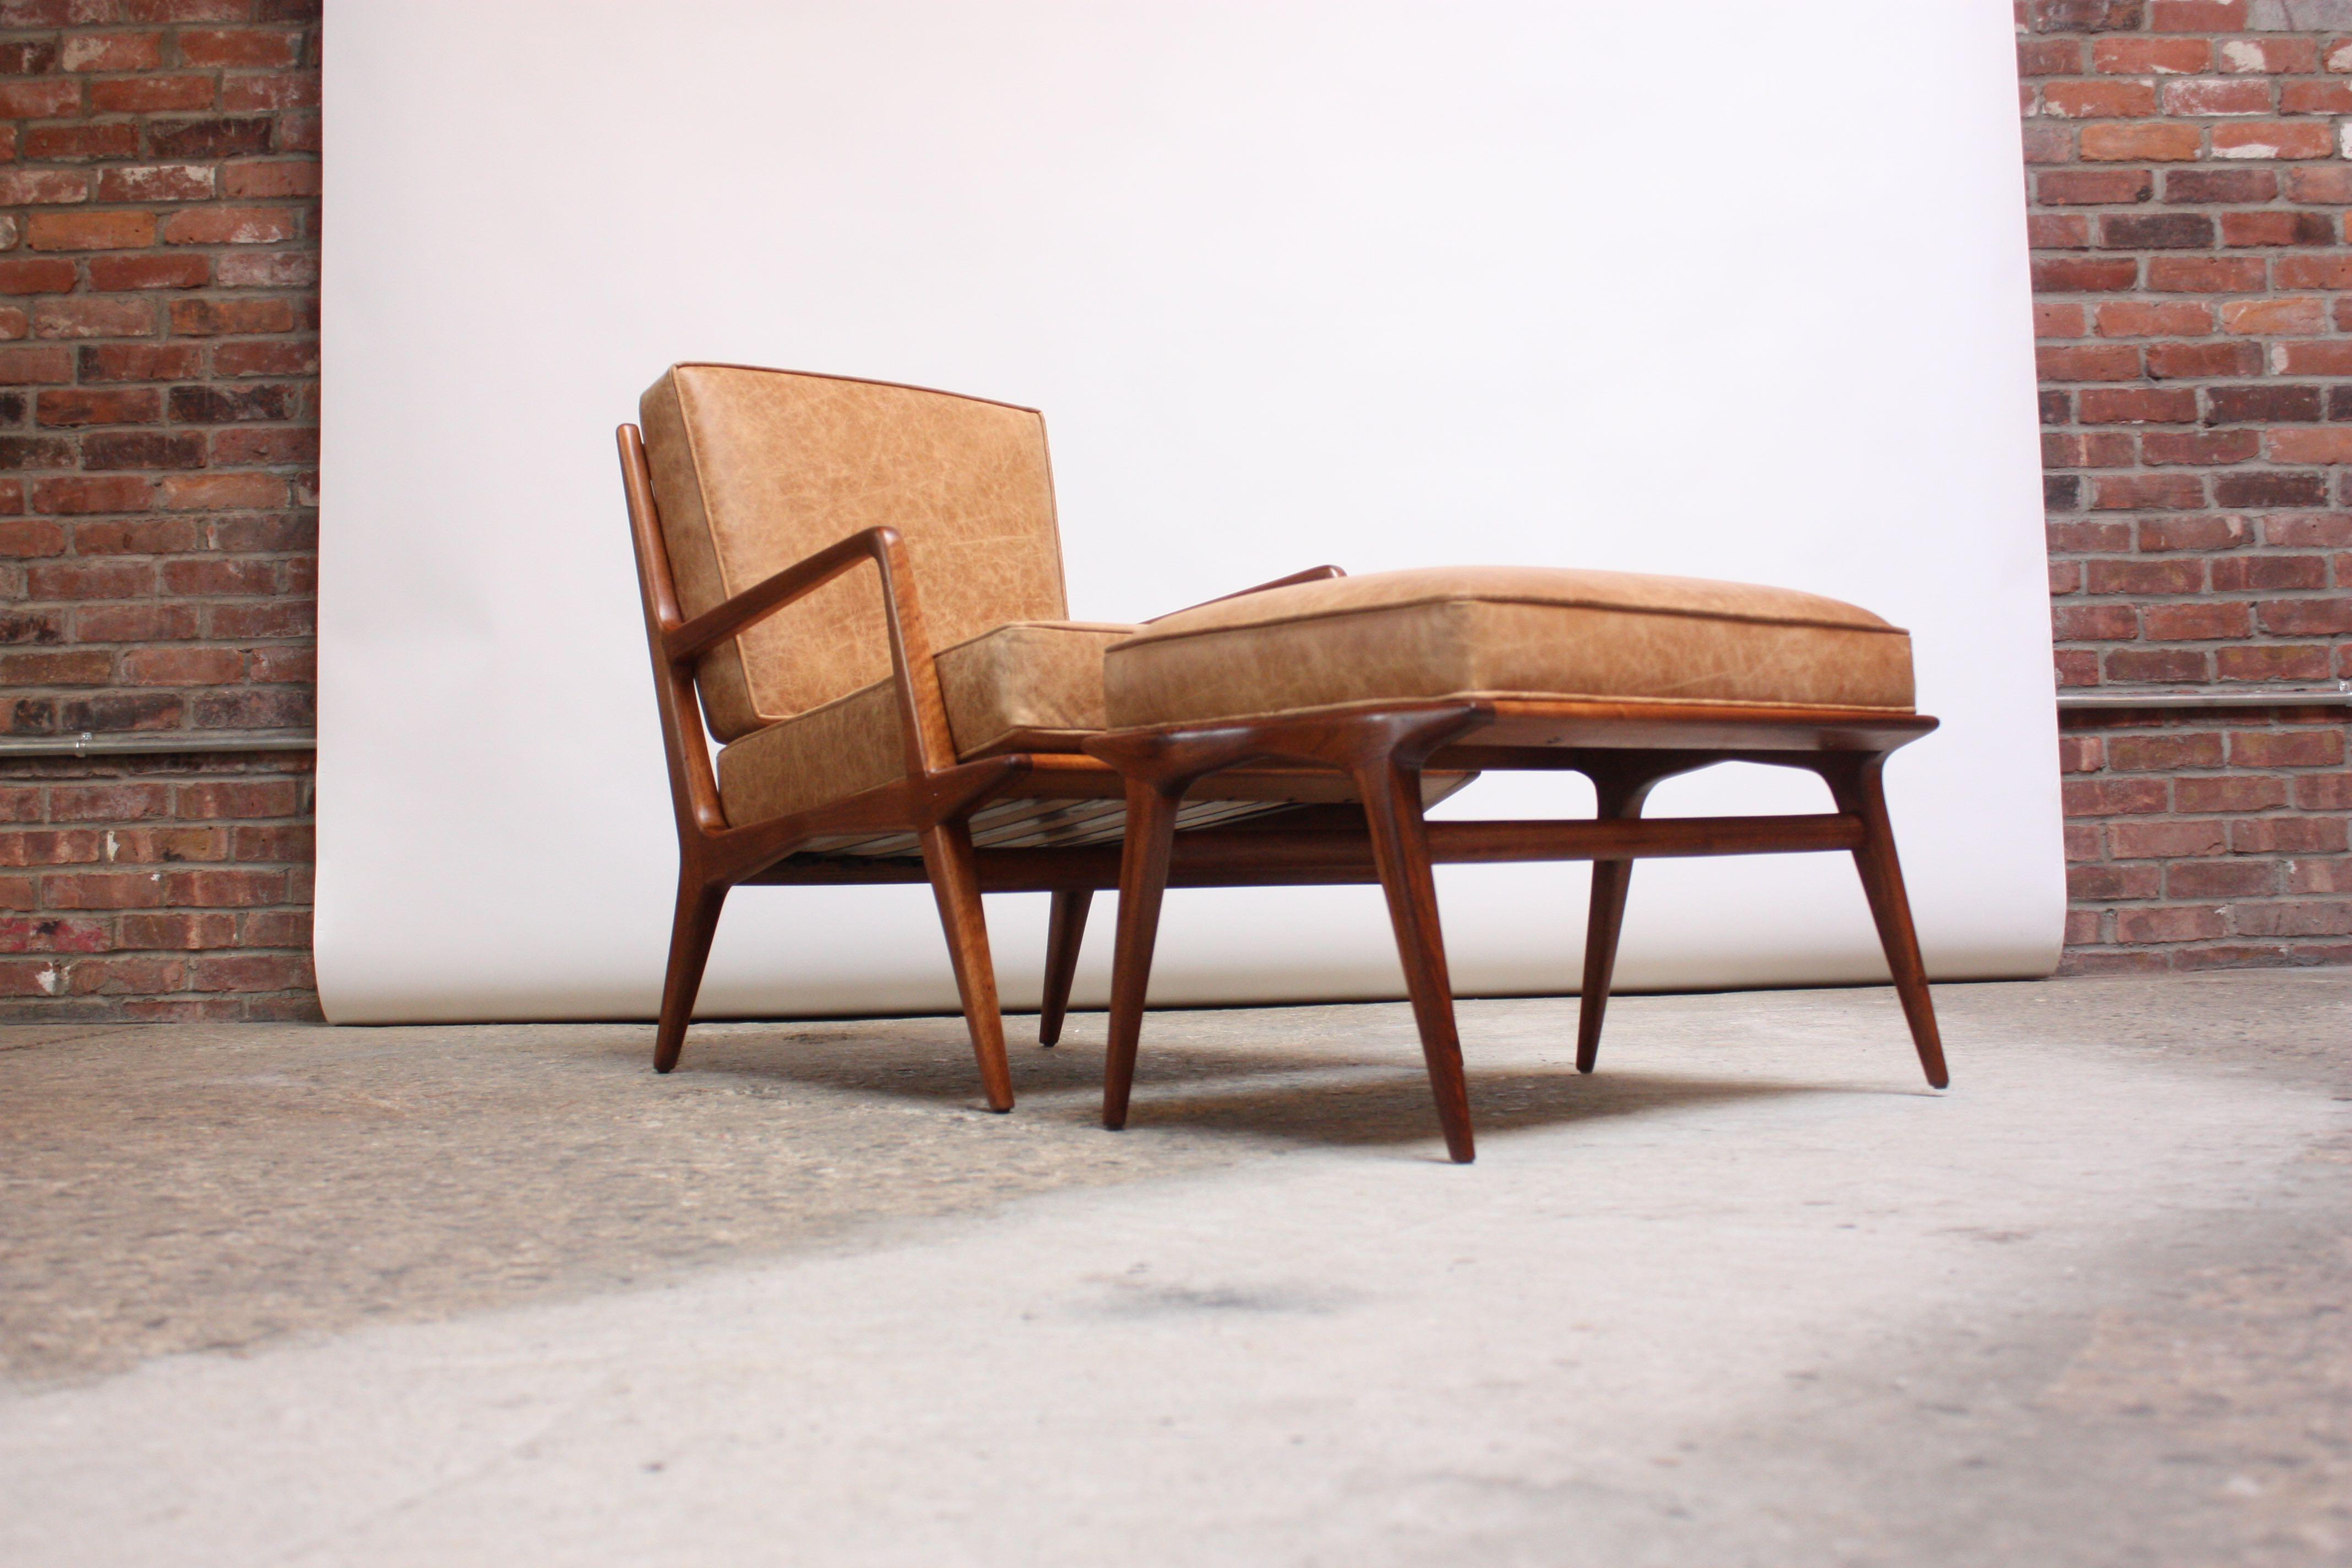 1950s Italian walnut lounge chair and ottoman designed by Carlo de Carli for M. Singer & Sons. Features a highly sculpted, ladder-back frame with clean lines and splayed-leg detail. Newly upholstered in brown, distressed leather with new foam. The